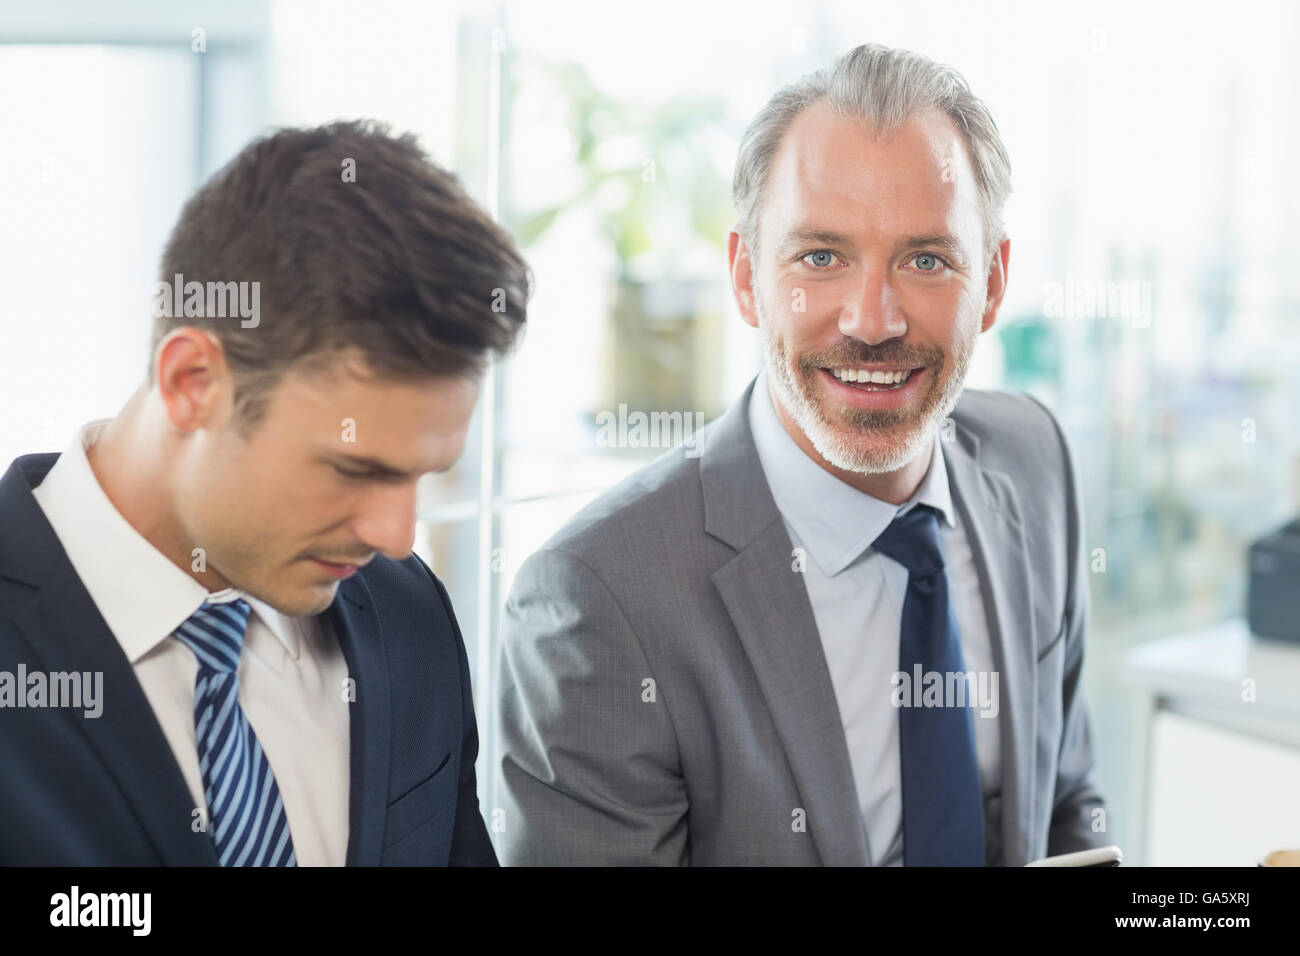 Two businessmen sitting with each other Stock Photo